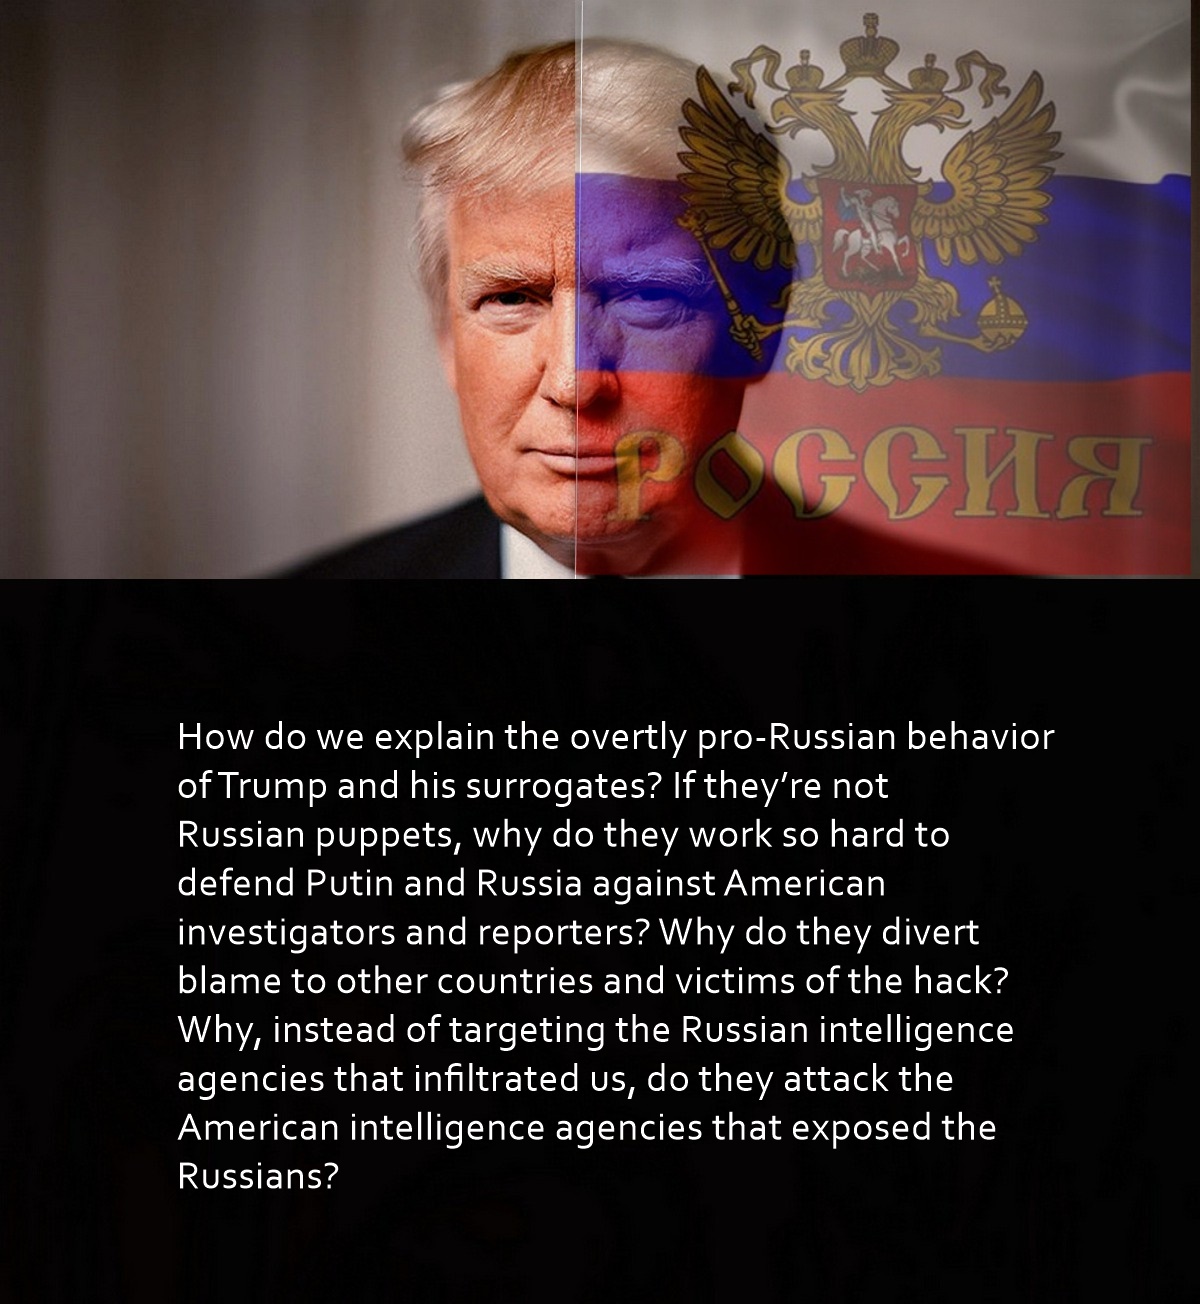 Why Does Donald Trump Continue to Defend Russia and Attack U.S. Intelligence?